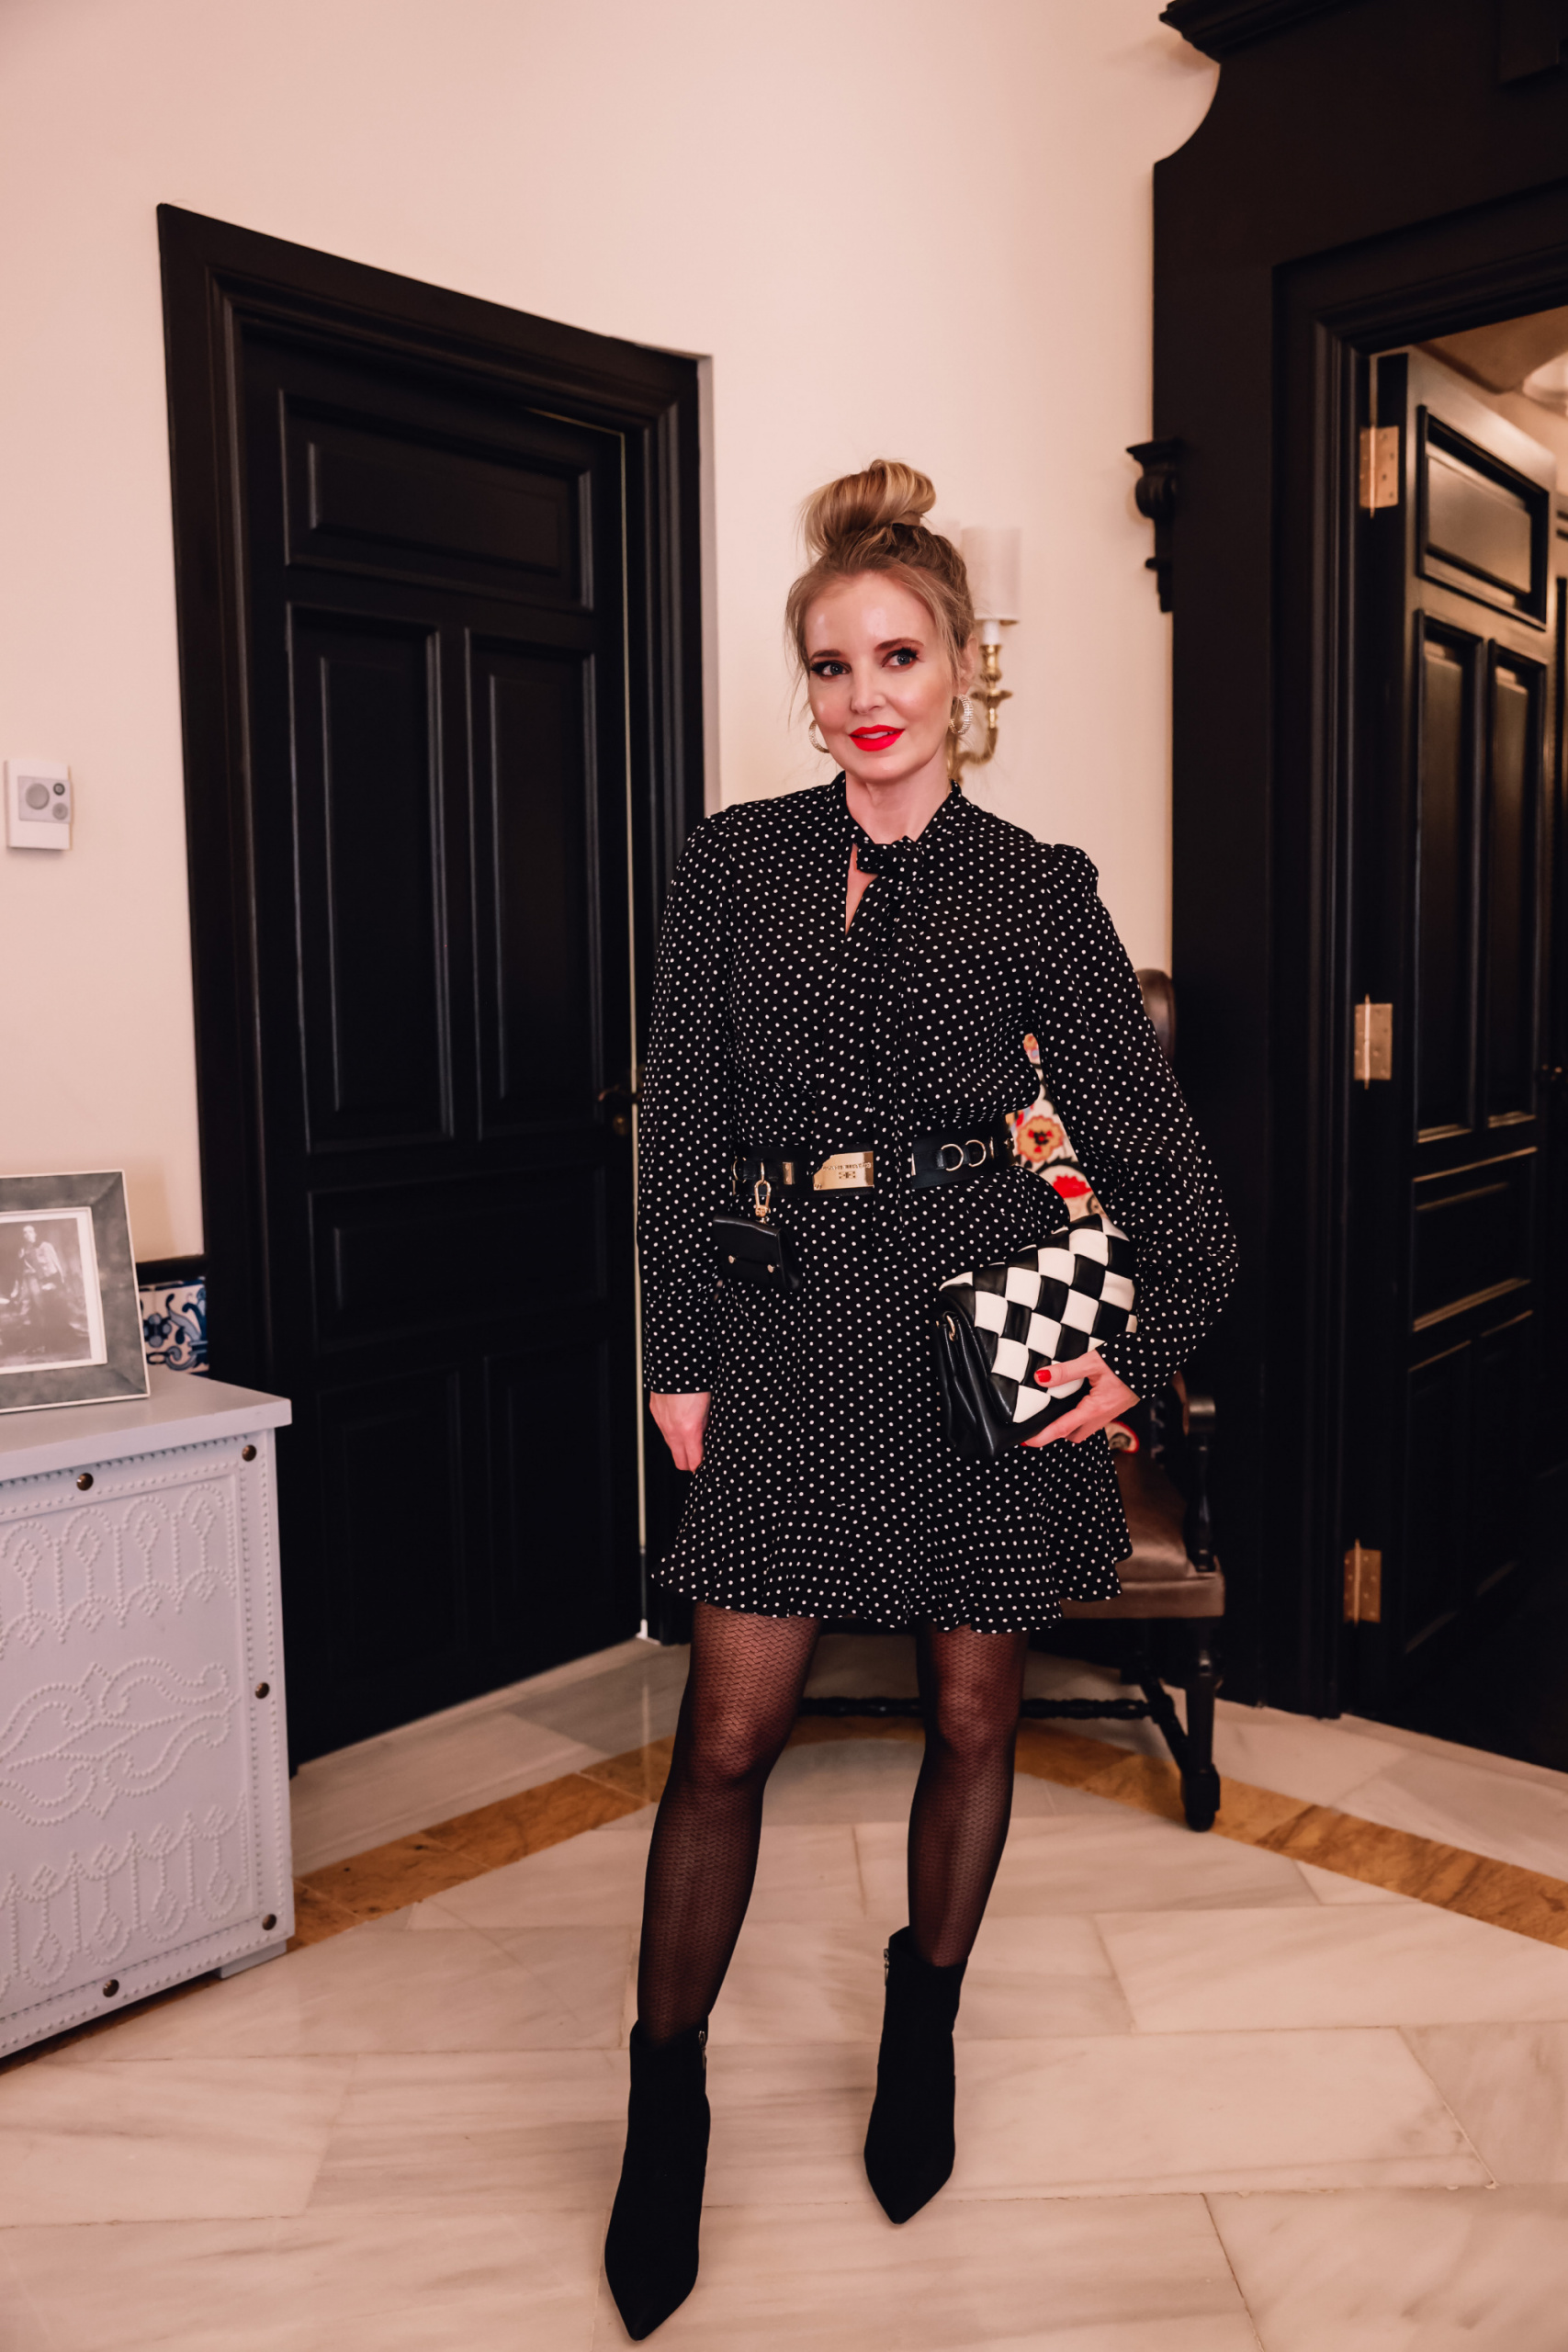 leggings versus tights, how to wear leggings, how to wear tights, difference between leggings and tights, erin busbee, patterned tights, polka dot dress, schutz bette boots, black and white check mango bag, Hotel Alfonso XIII